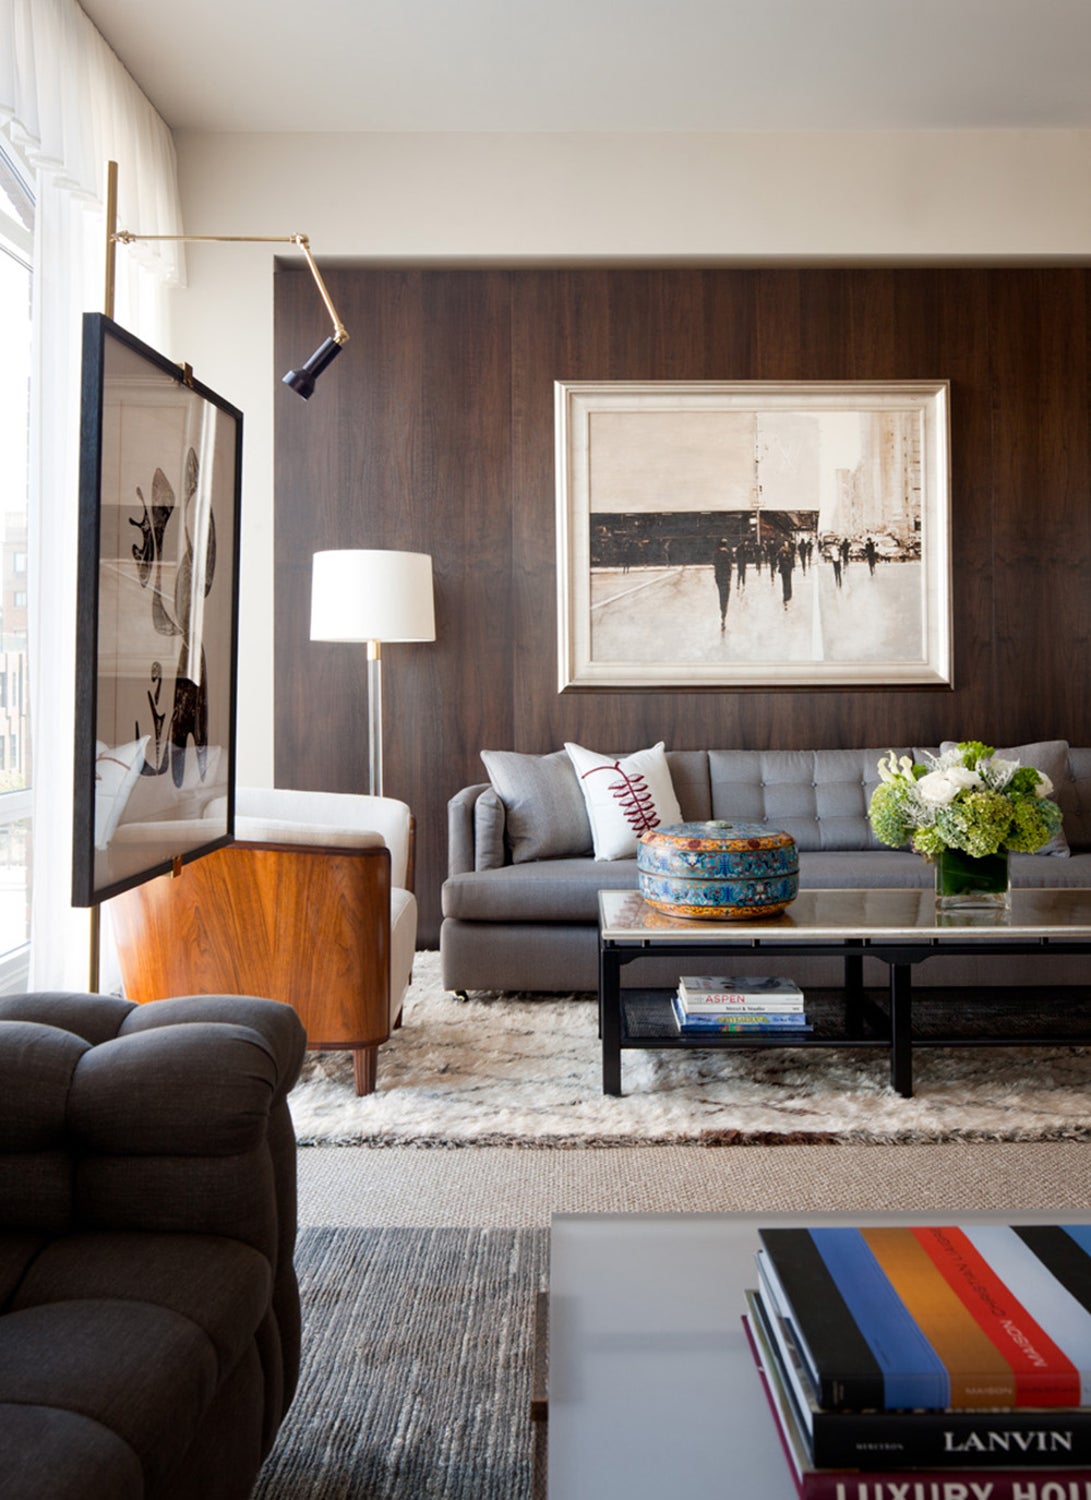 Living Room by Shawn Henderson Interior Design on 1stdibs